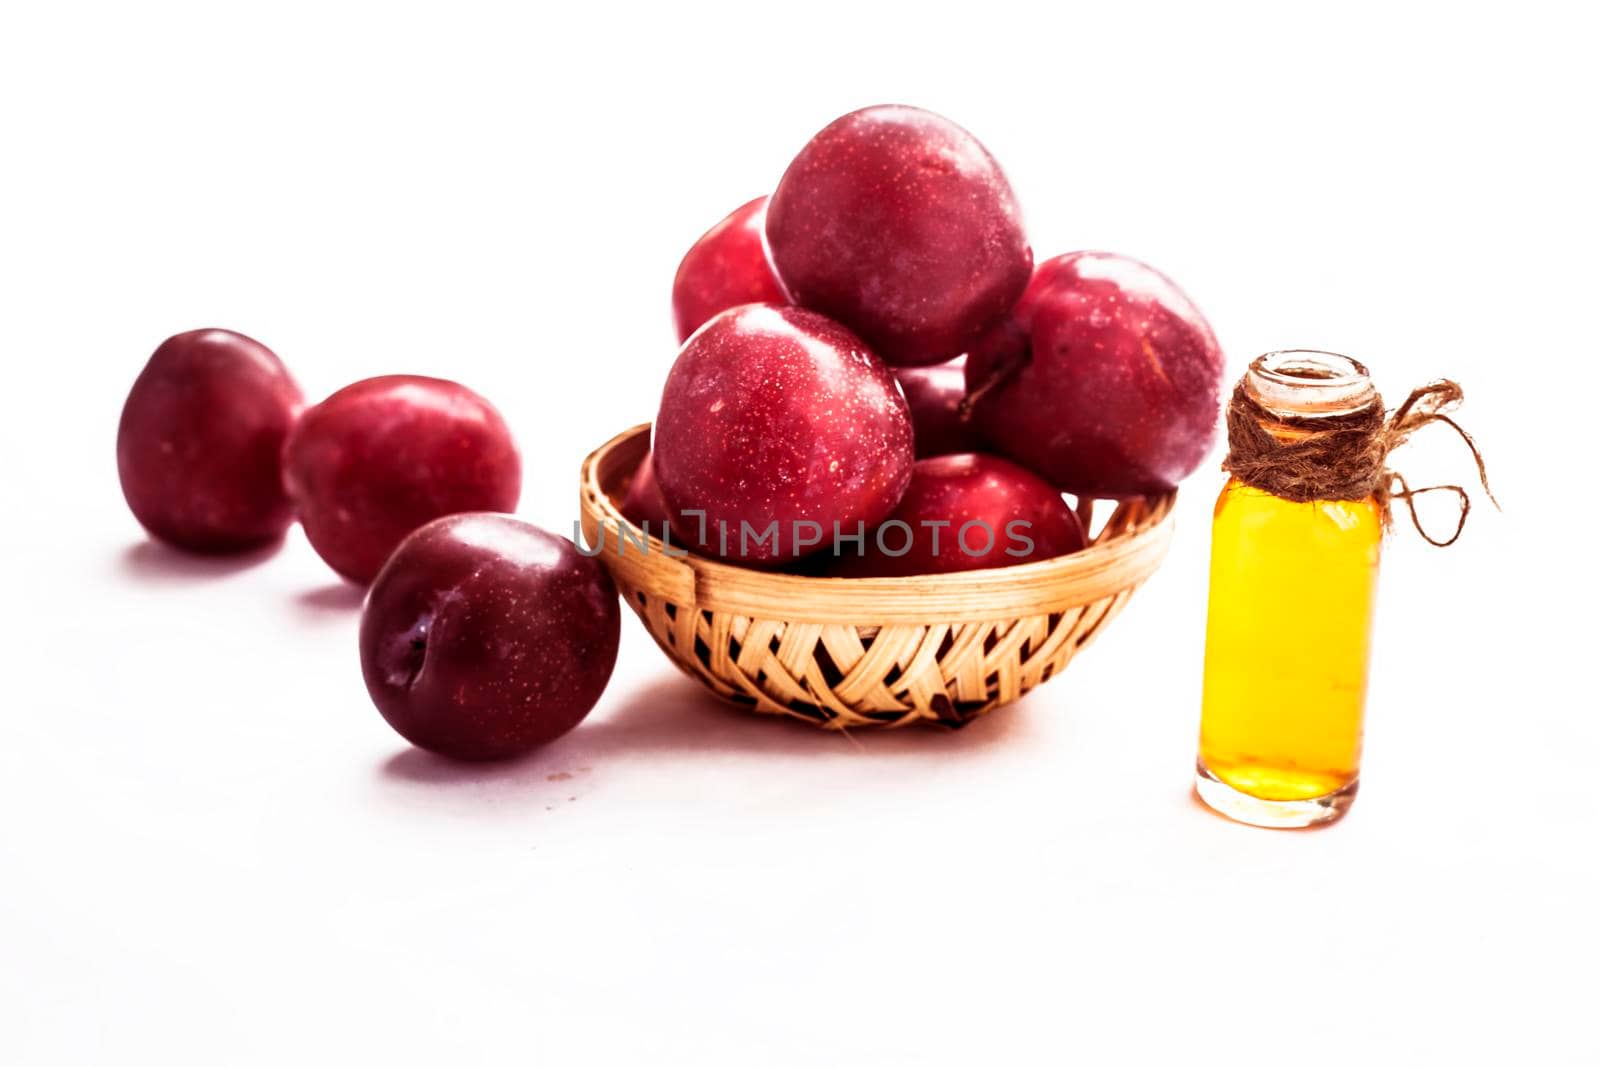 Raw organic red ripe plums in a brown-colored basket along with its extracted essential oil in a transparent glass bottle isolated on white. by mirzamlk